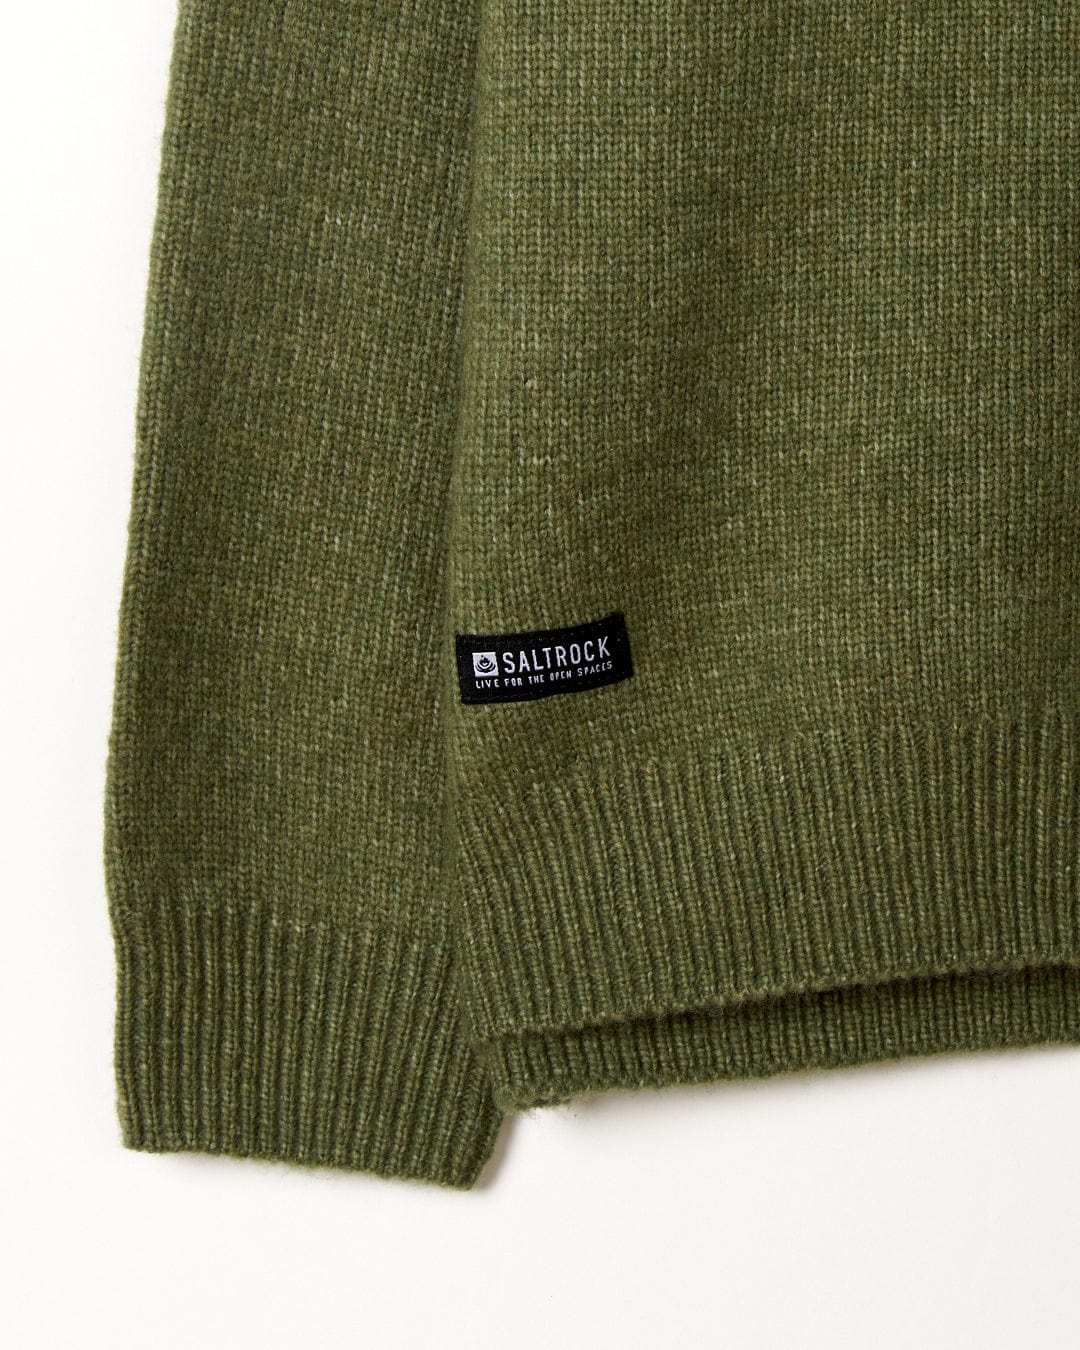 Close-up of a soft, green Saltrock sweater's sleeve with brand label.